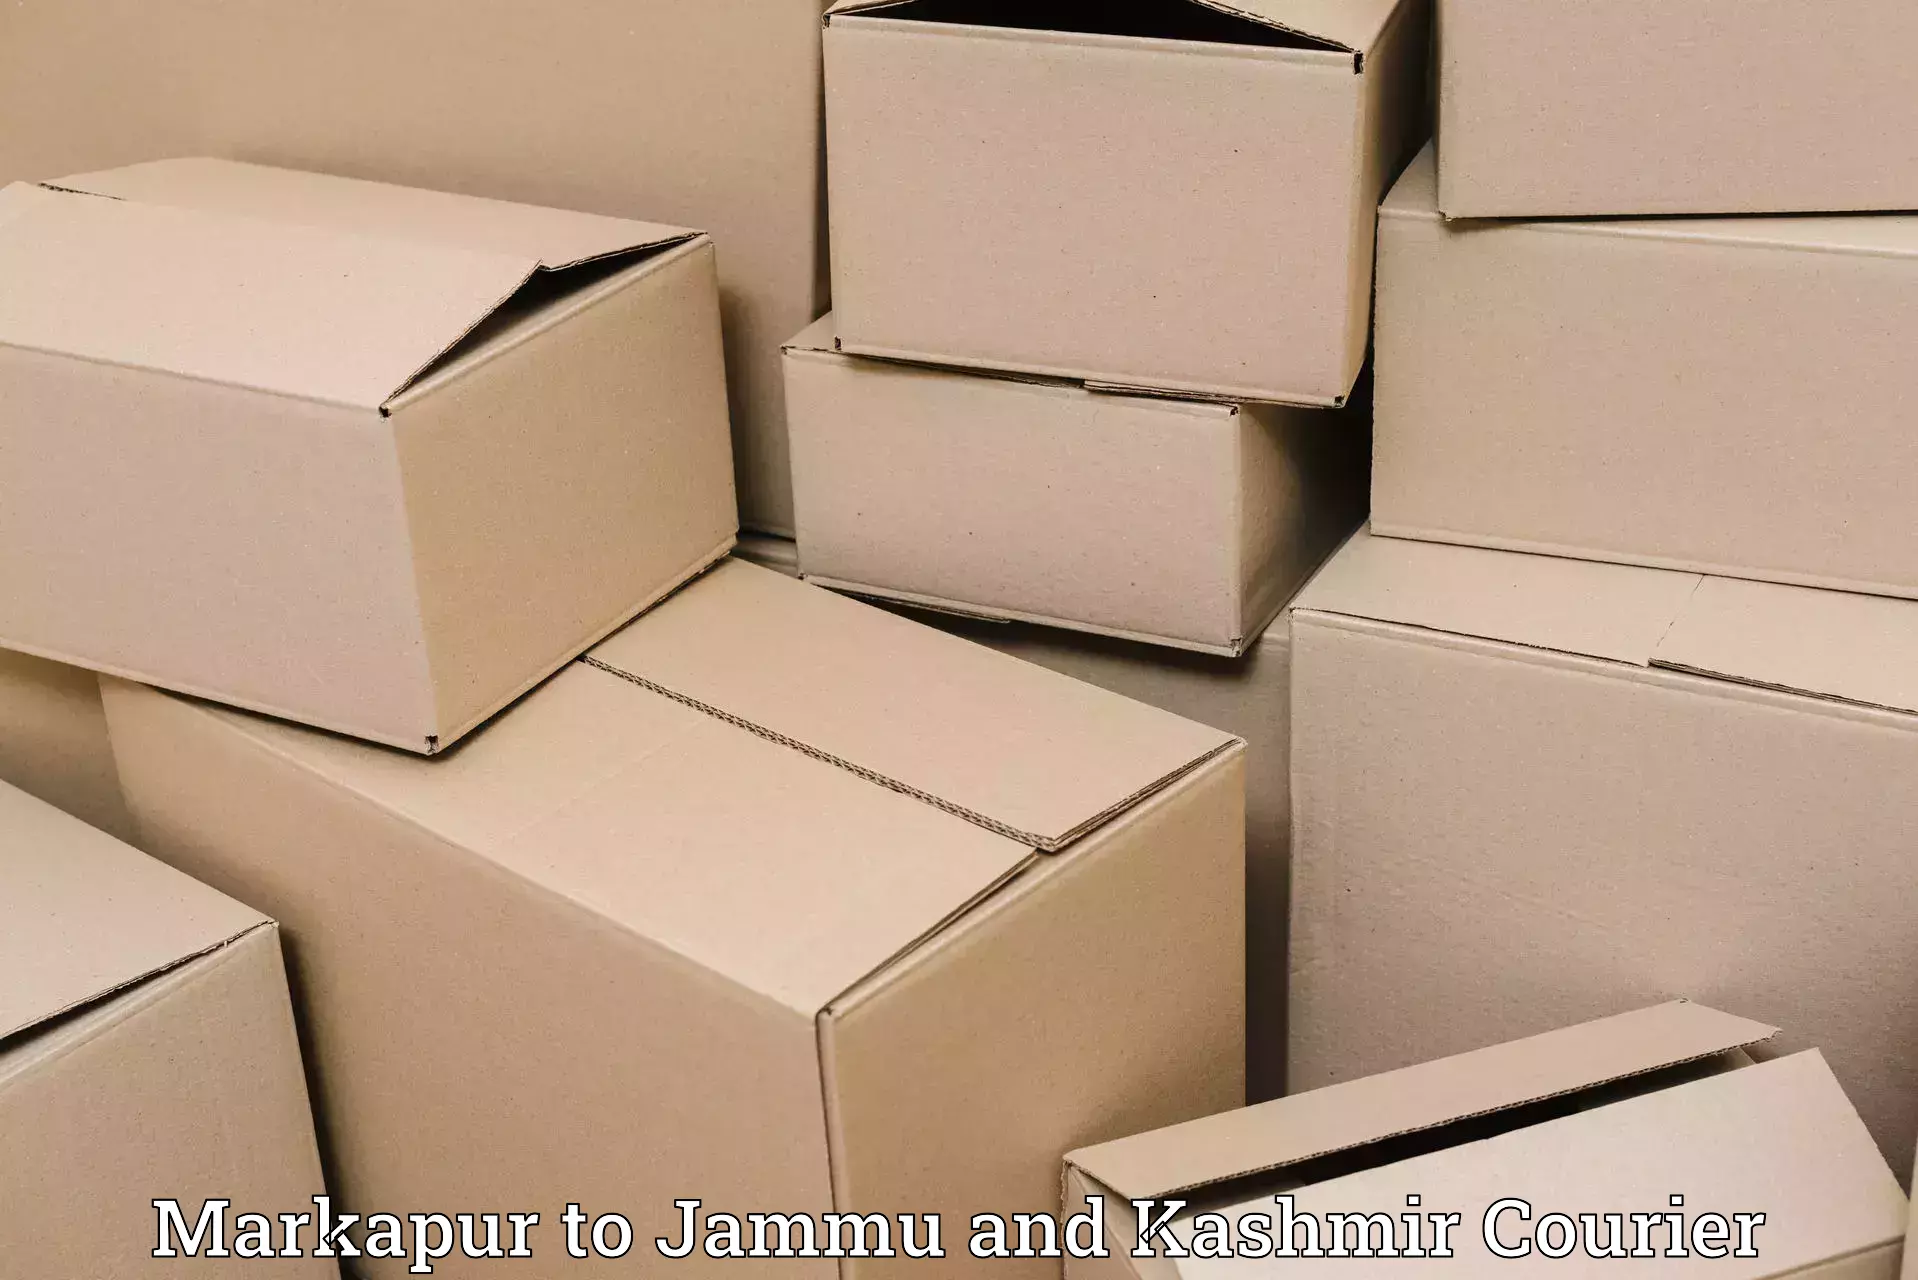 Secure package delivery in Markapur to Baramulla